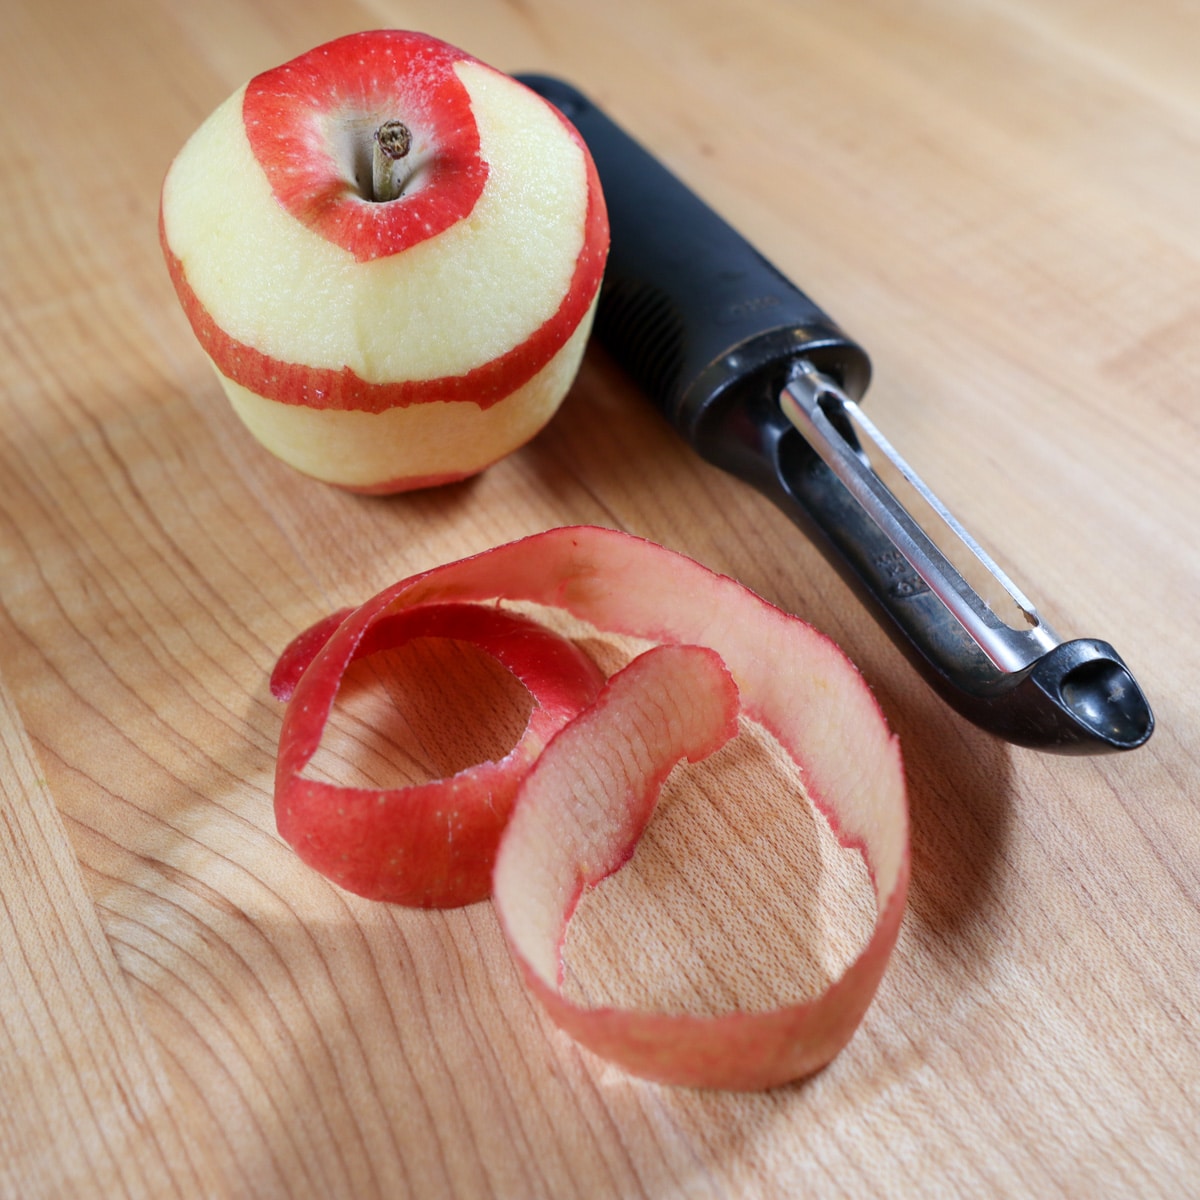 apple with a peel